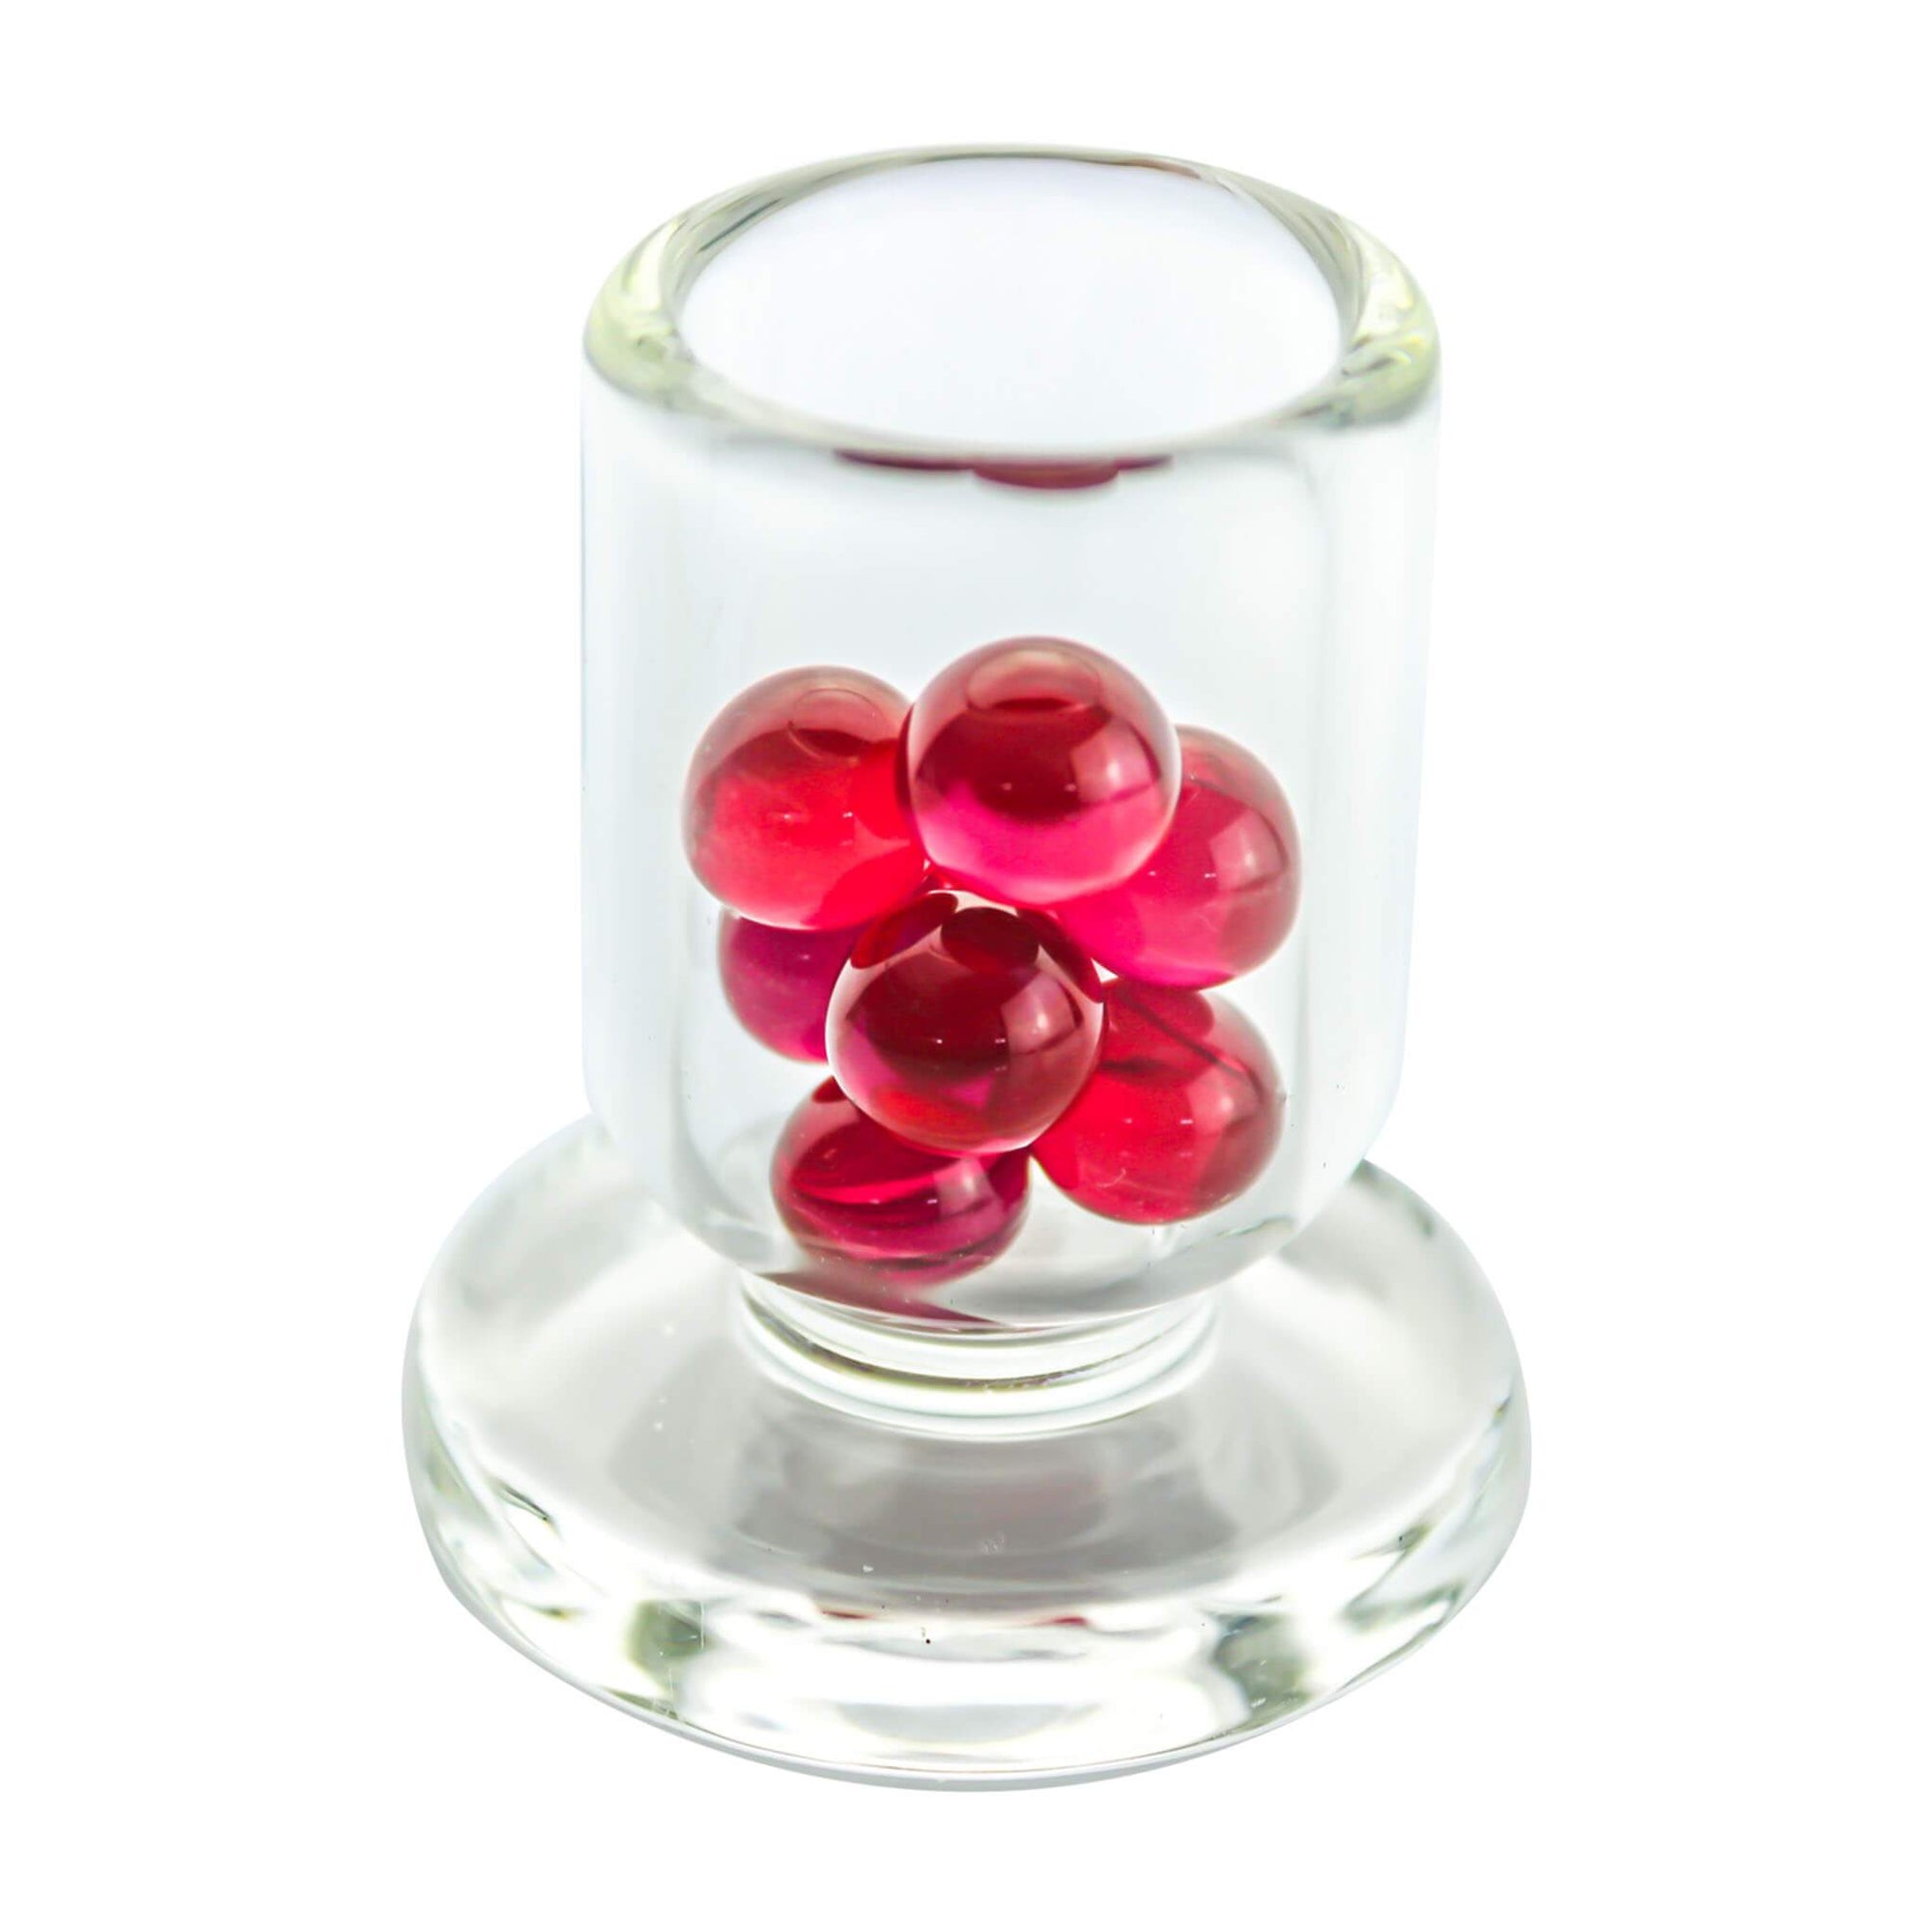 8mm Terp Pearls-Ruby | Ruby Terp Pearls In Banger View | Dabbing Warehouse